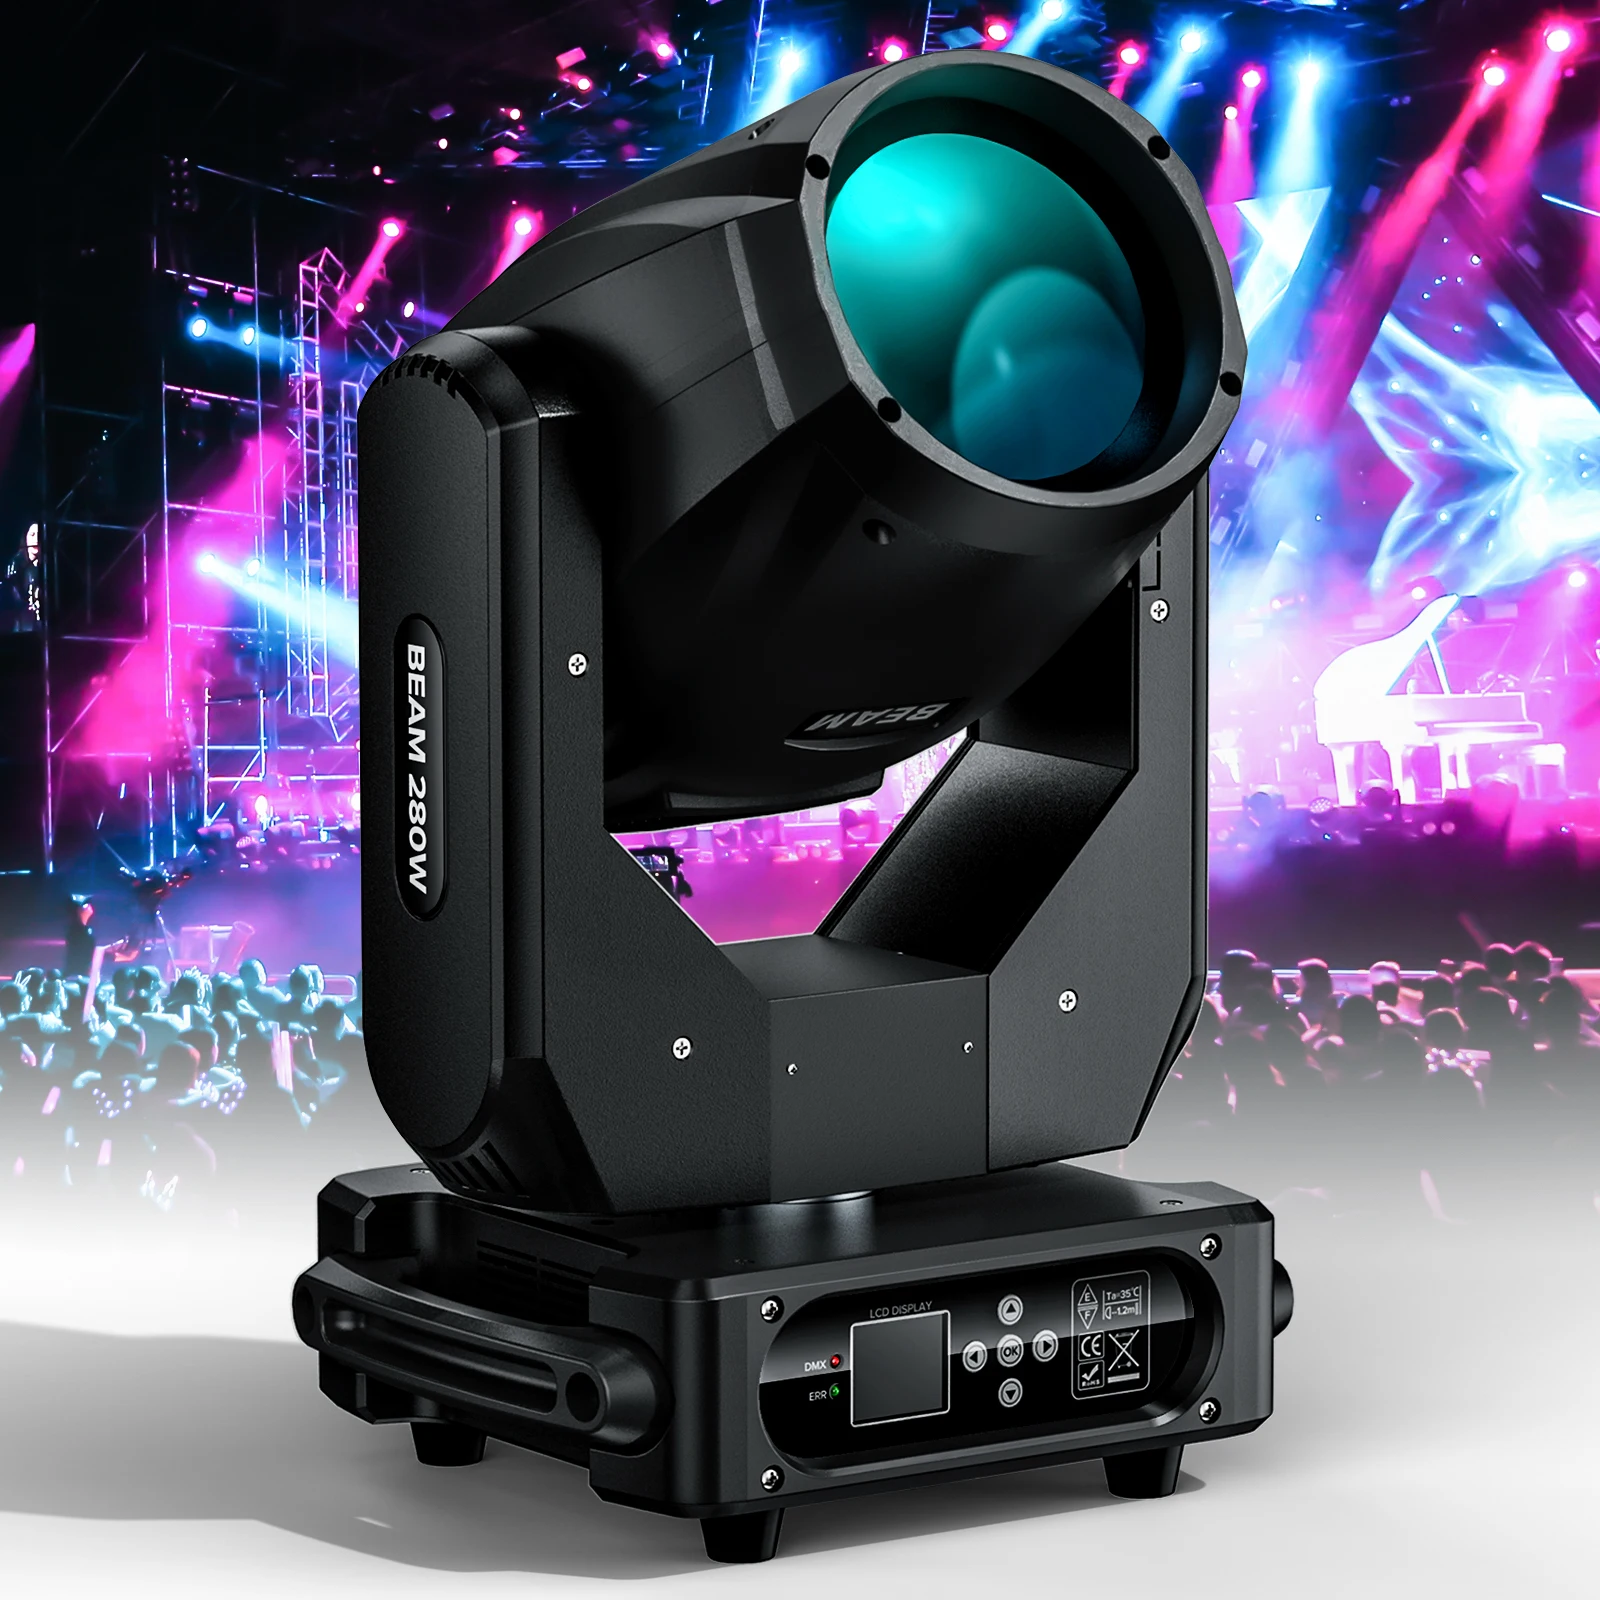 250W Moving Head Beam Spot Wash Stage HOLDLAMP with 17 Gobos Patterns 14 Colors DMX Control for DJ Club Party Show